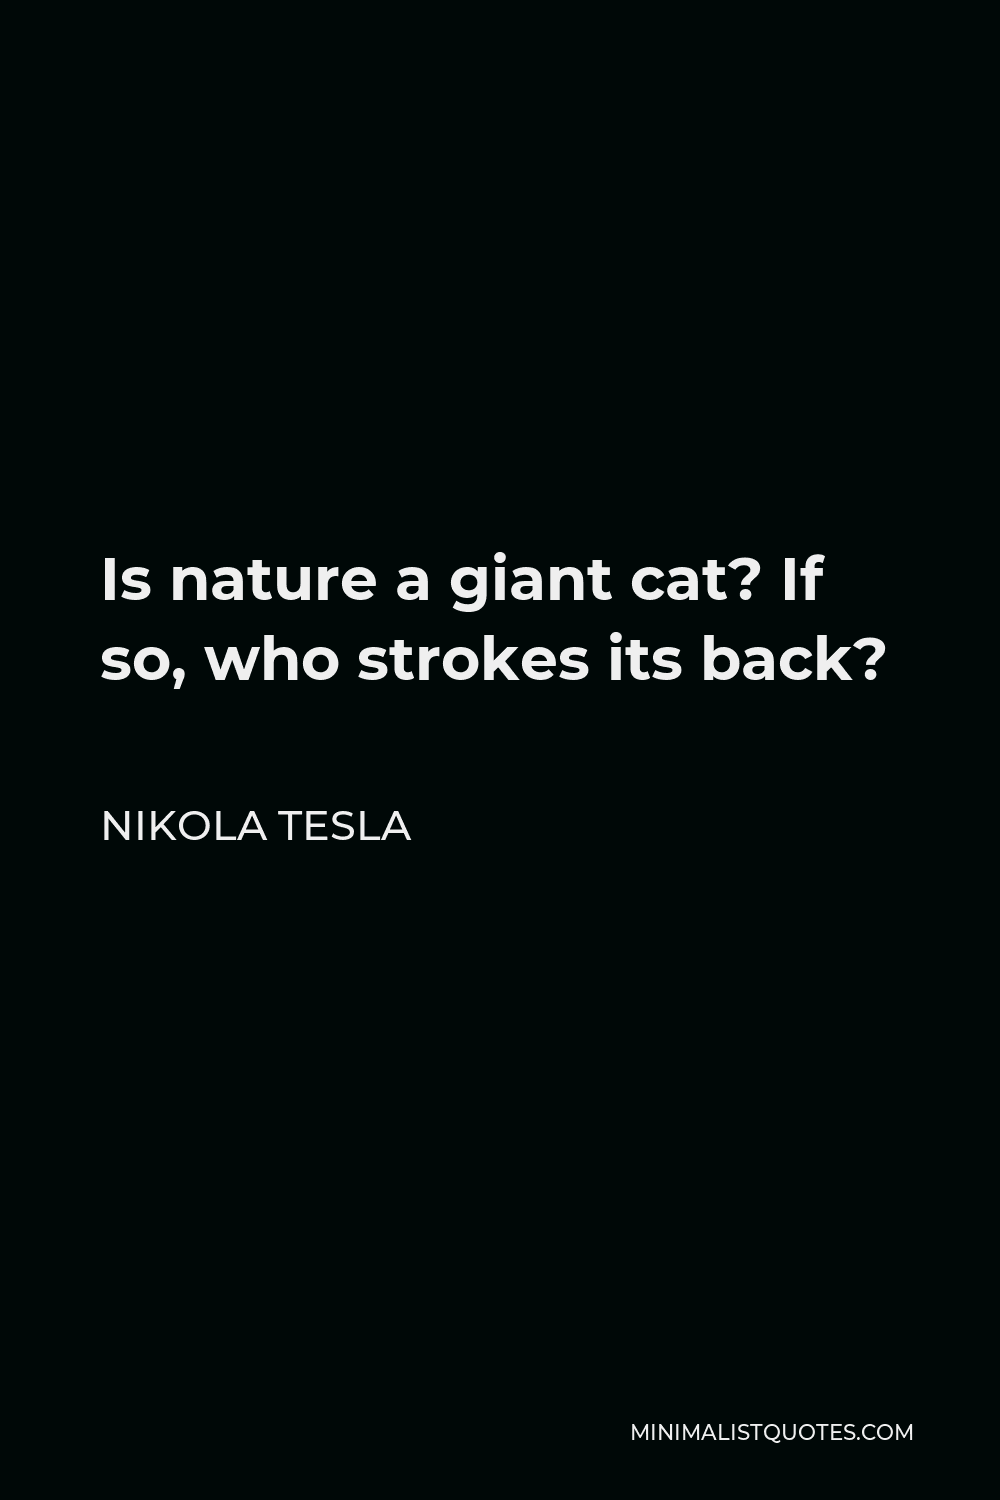 Nikola Tesla Quote - Is nature a giant cat? If so, who strokes its back?